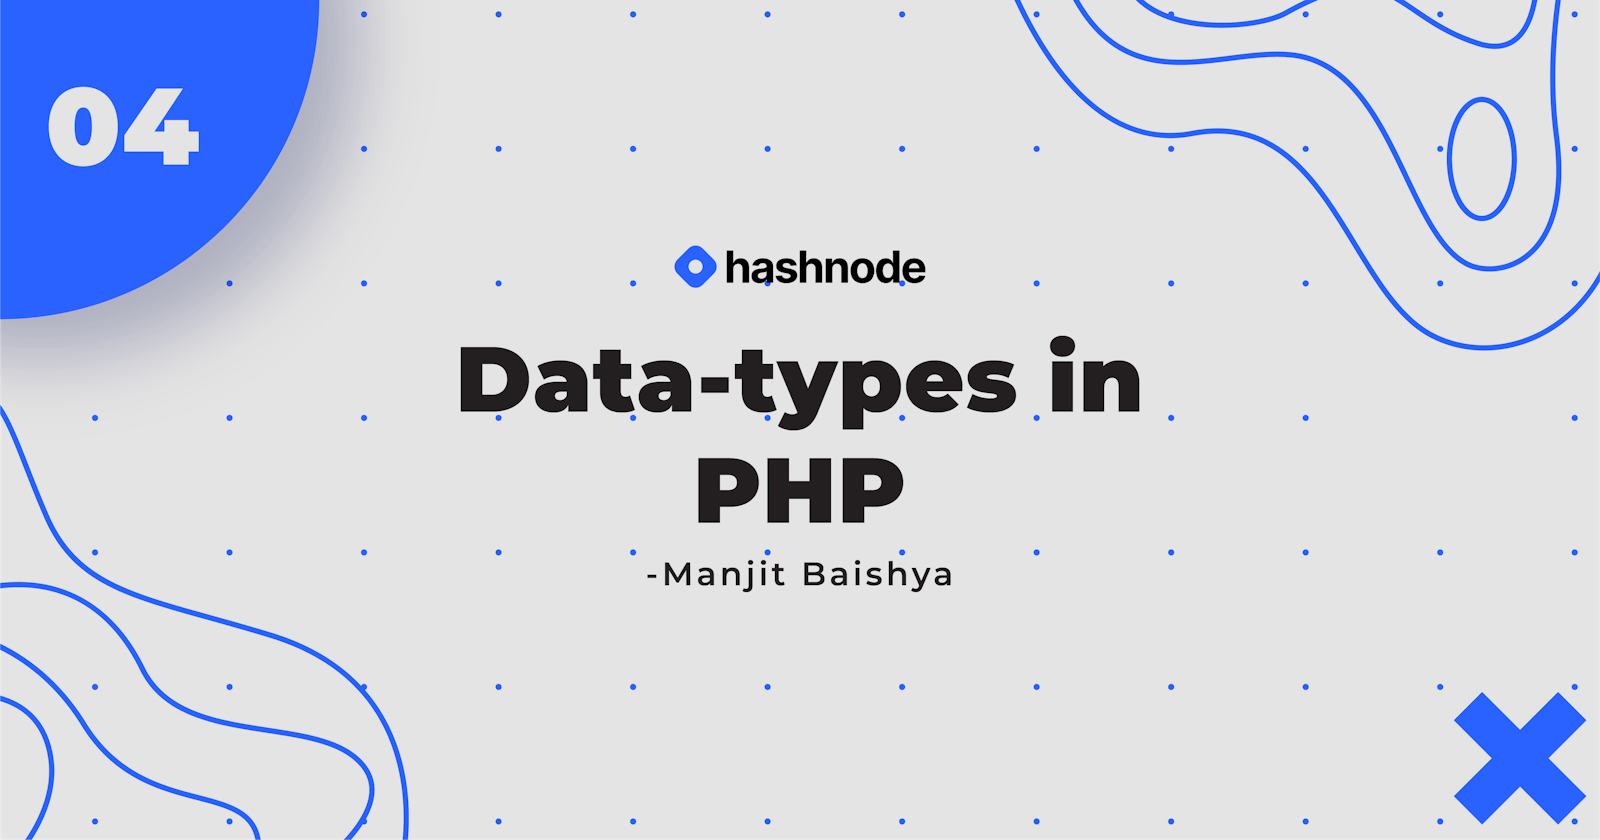 Day 4: Data-types in PHP